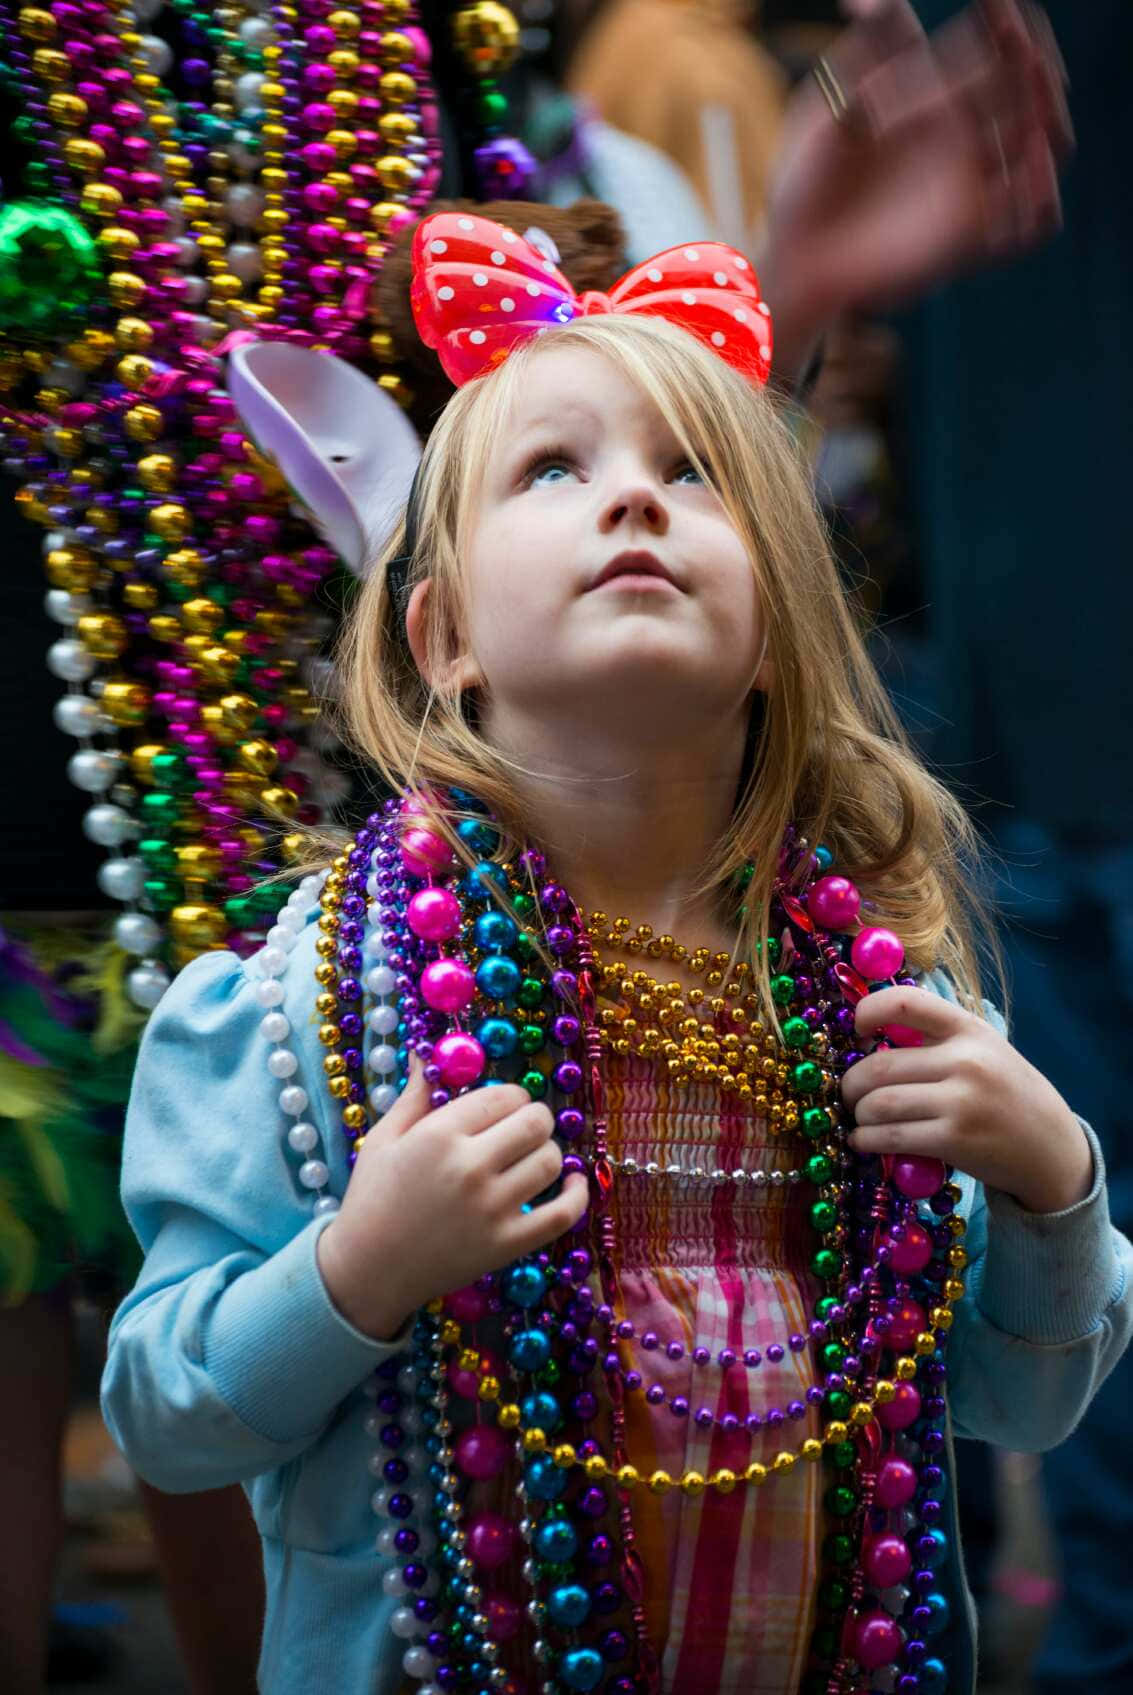 A Little Girl Wearing Beads And A Bow